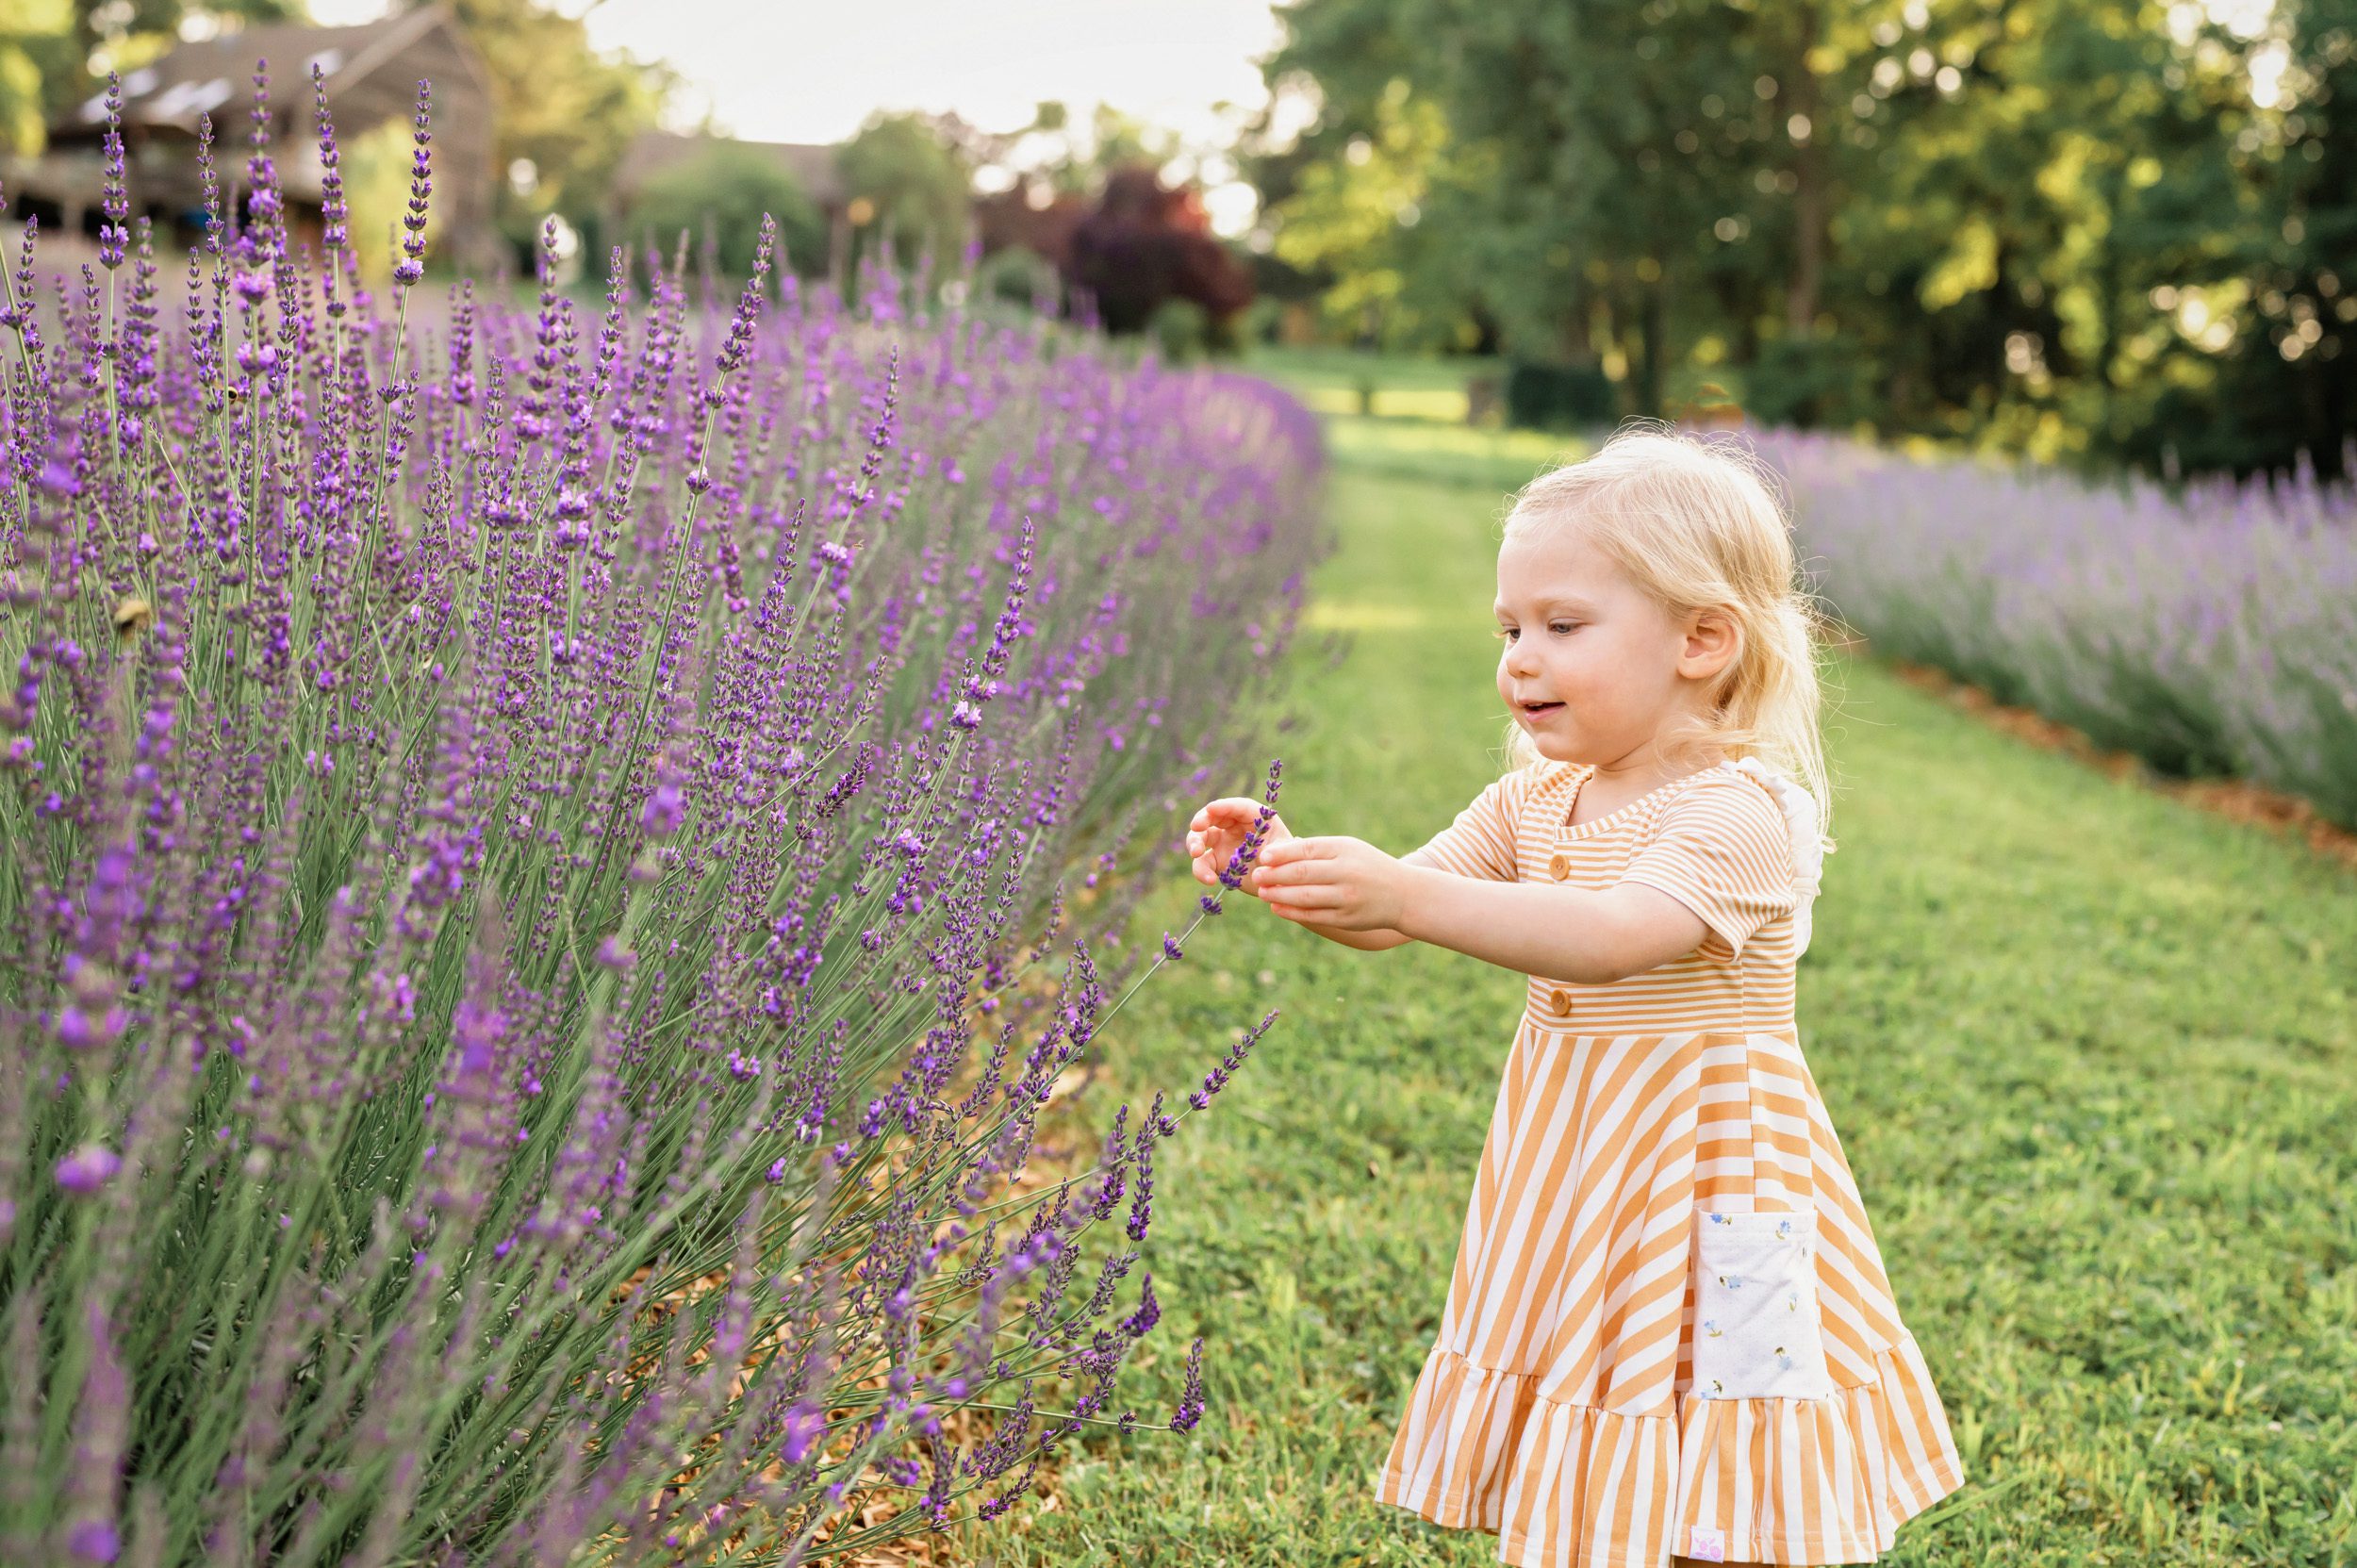 A young girl reaching out to touch a lavender flower in a field of purple lavender during a family photo session